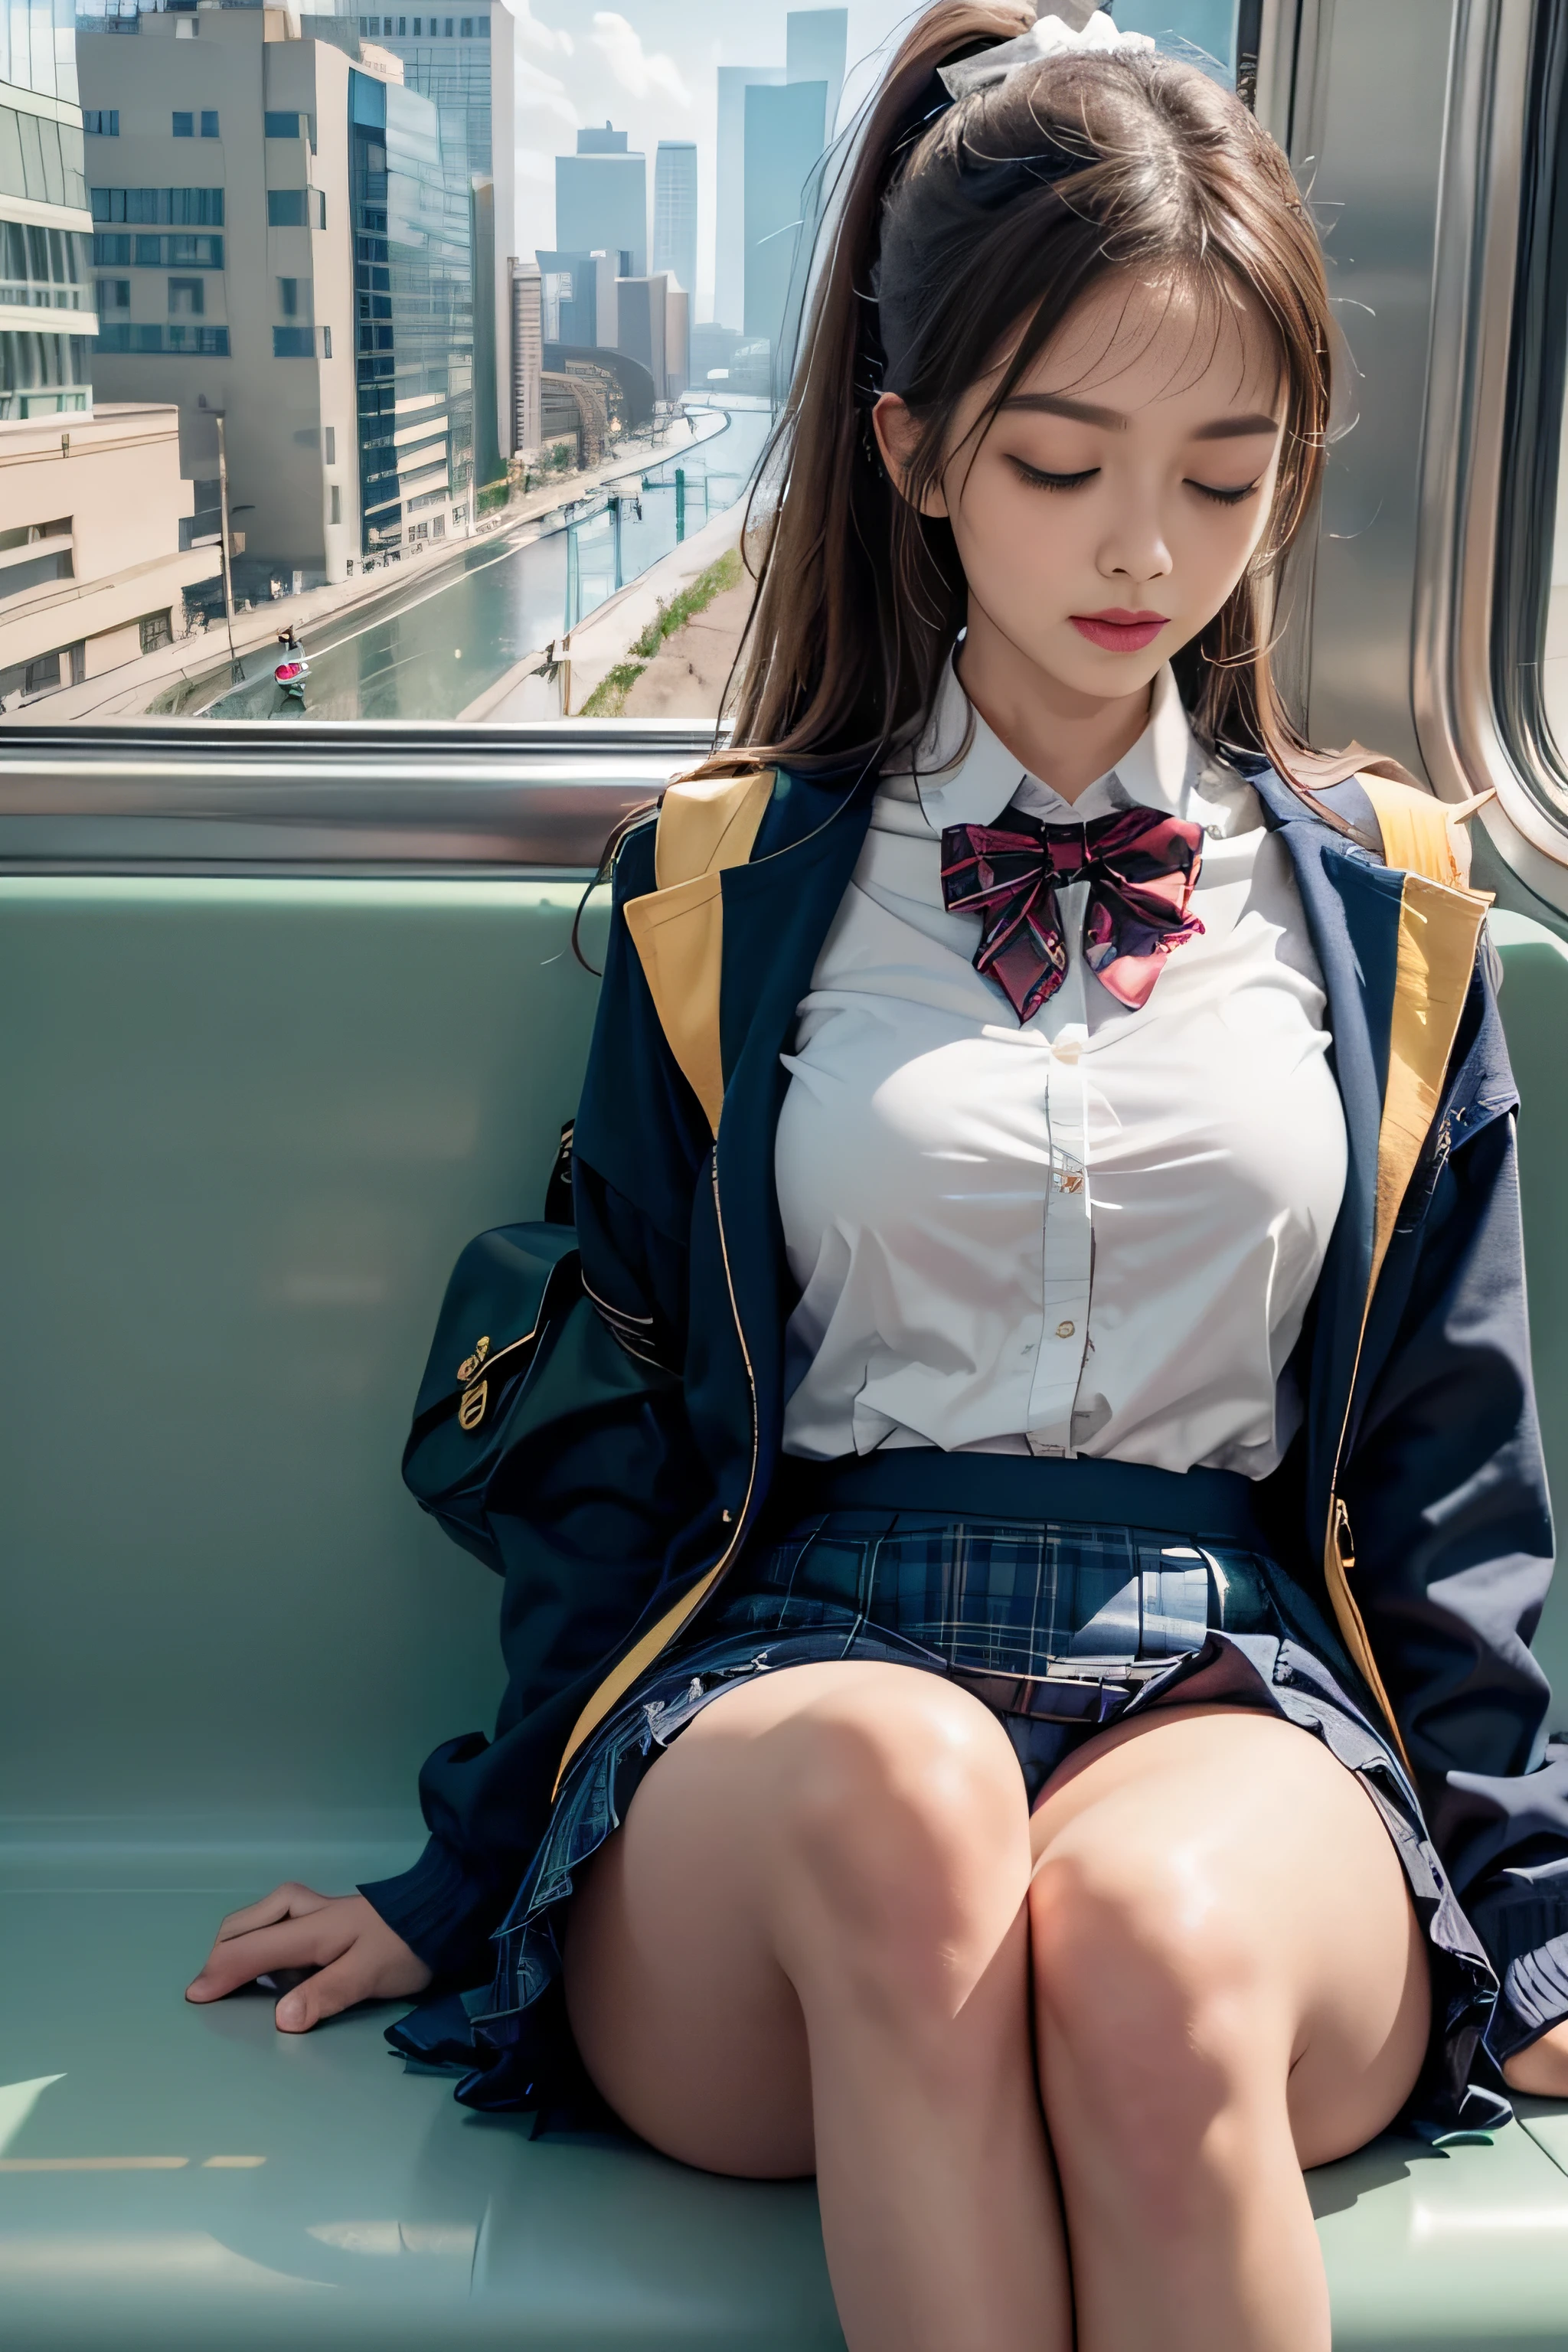 realistic, High resolution, soft light,1 female, alone, waist rises high, (detailed face),(Female student)（(Girl sitting on train))，colorful hair、shortcut，wear、(White blazer emblem on chest)、(translucent white blouse)、(red bow tie)(check skirt),long hair、(ponytail)、((Panty shot)）、（You can see the white lace panties）、(close your eyes),(legs open)